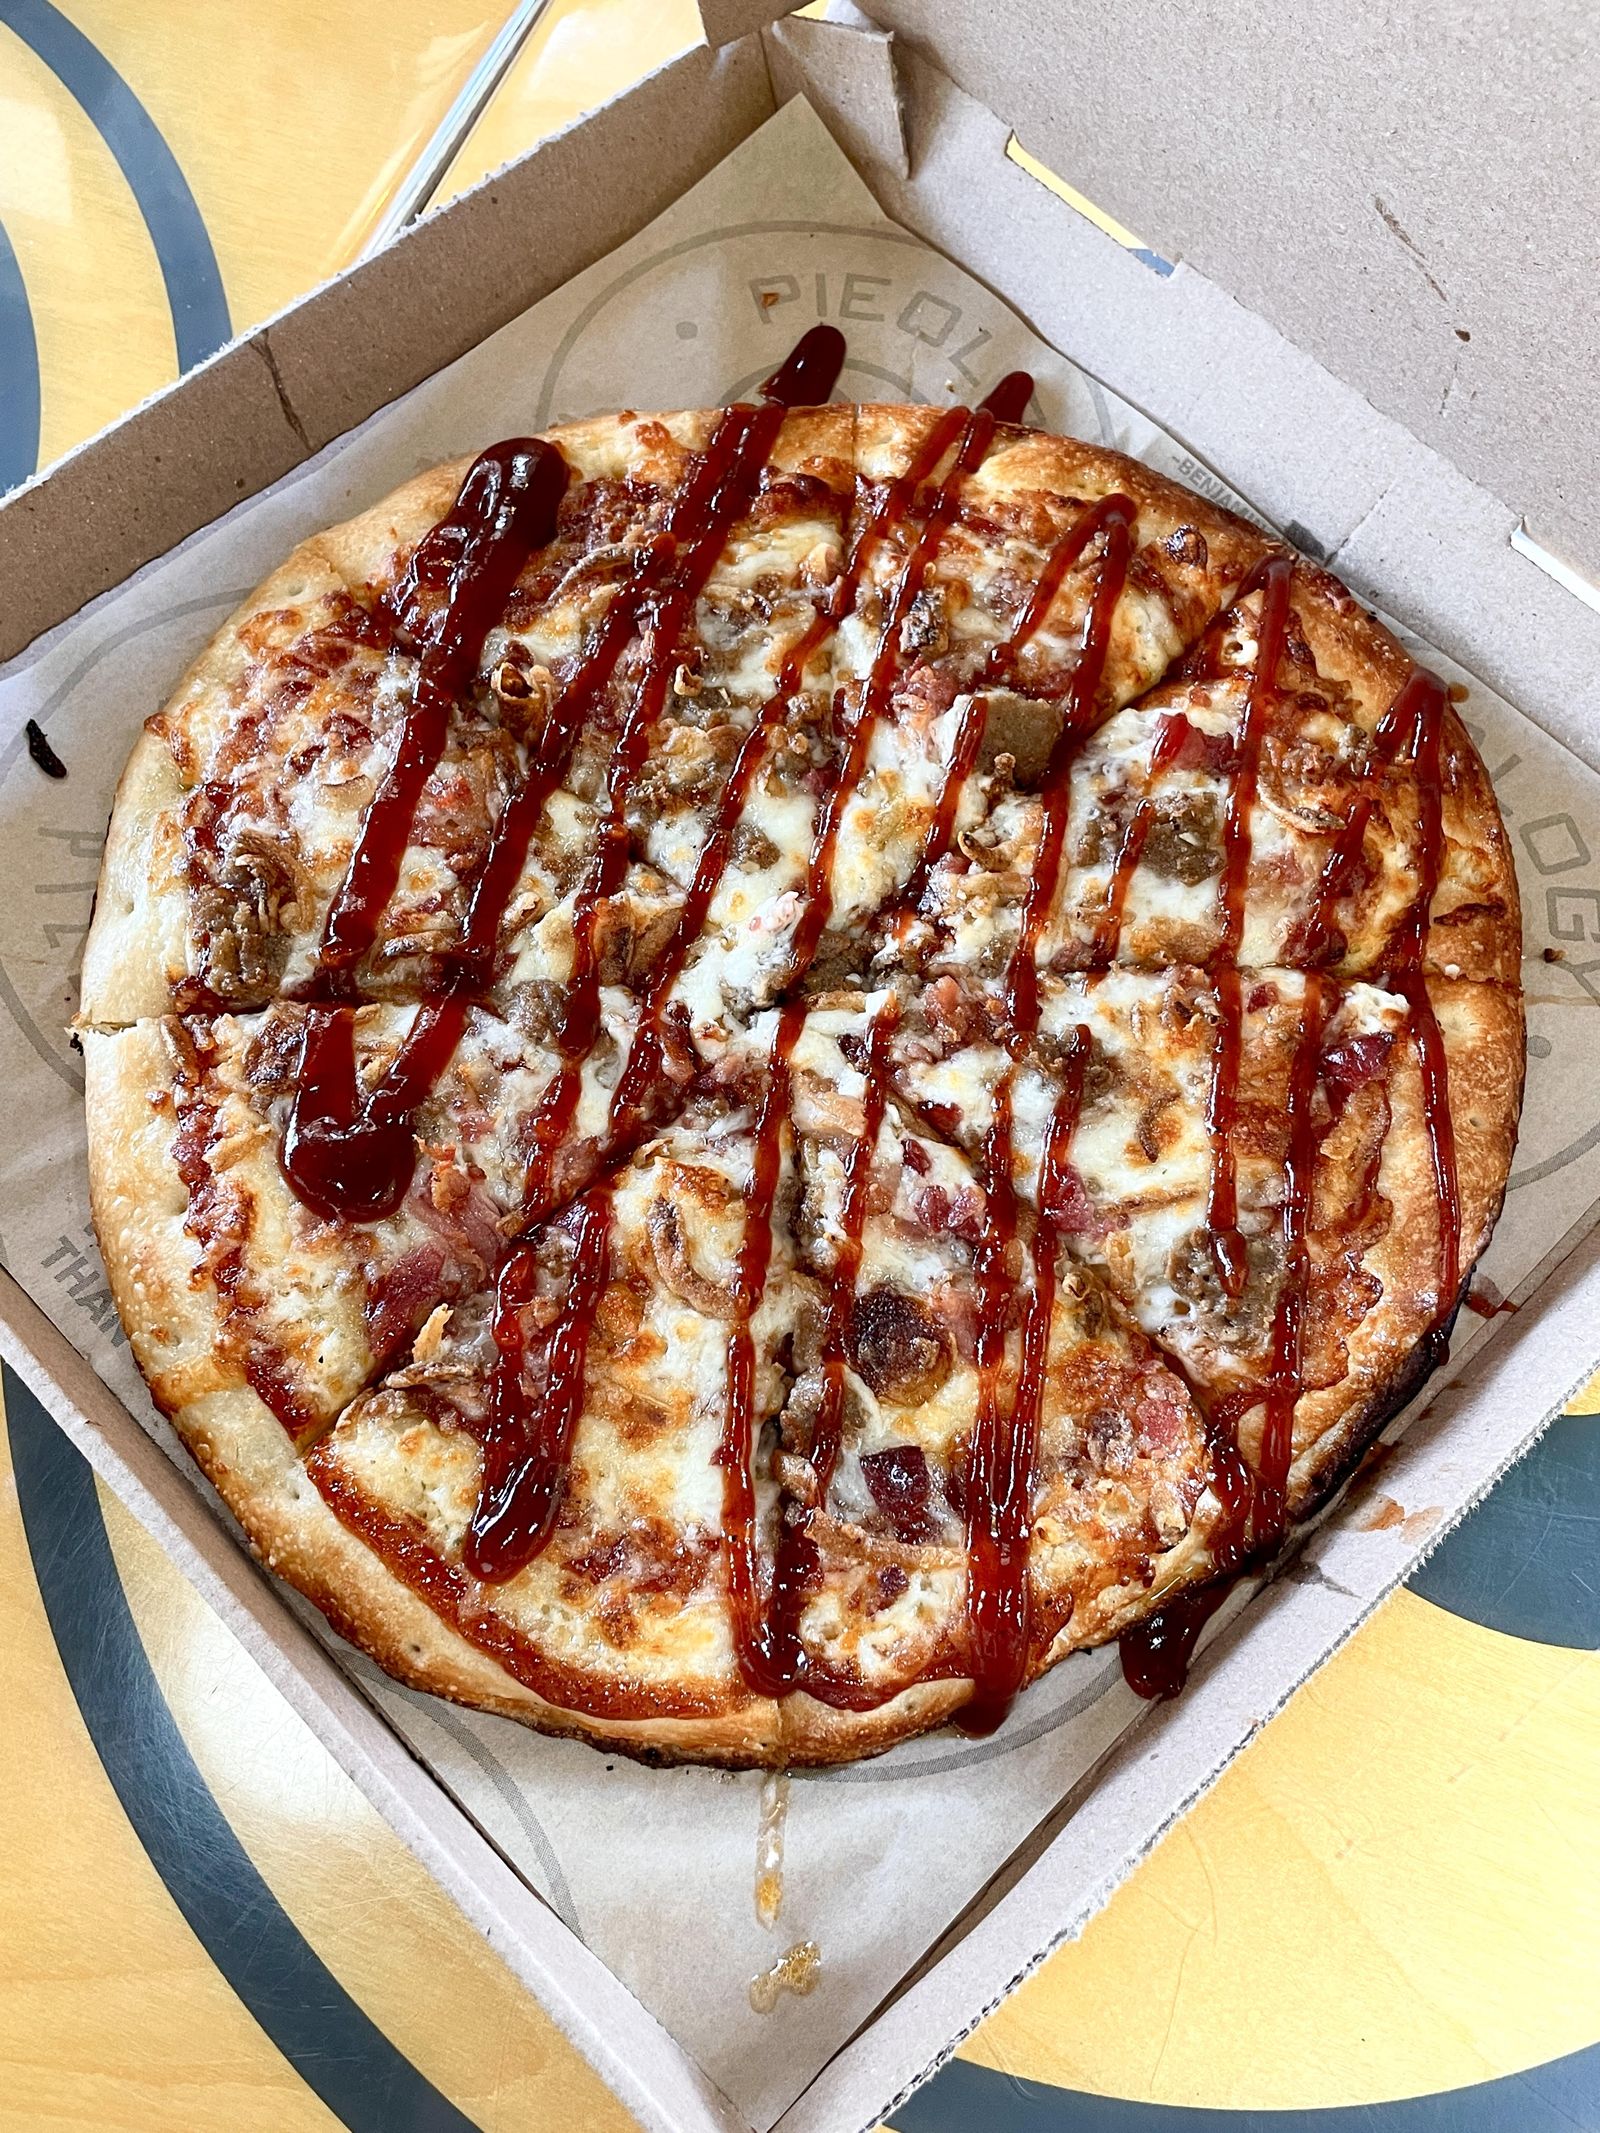 Pieology and Foodbeast Partner to Create LTO Western BBQ Pizza October 12